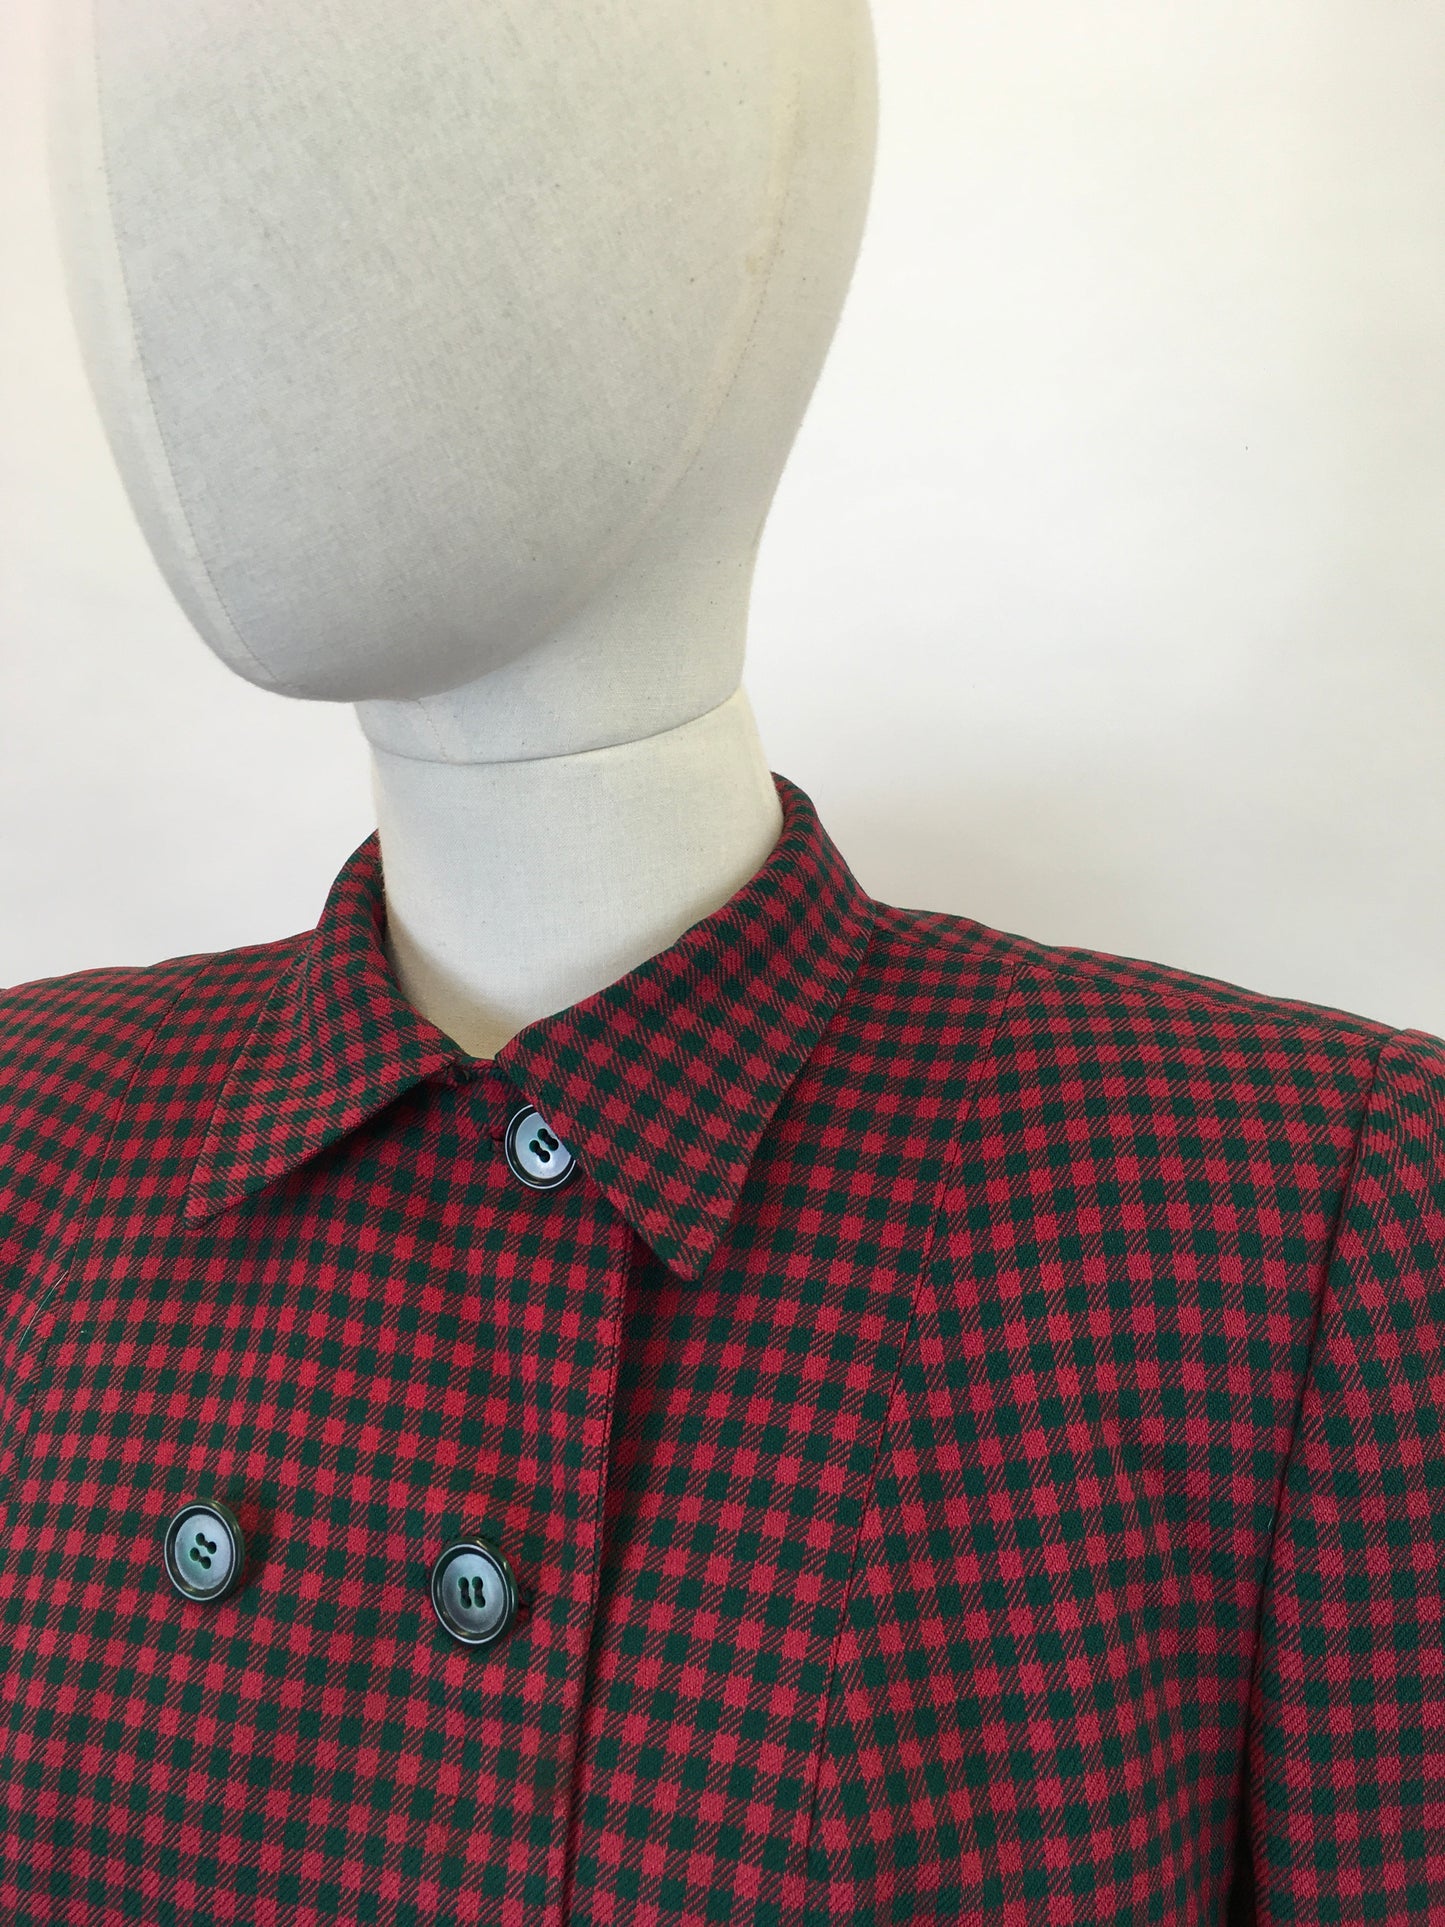 Original 1940’s American Double Breasted Jacket - In A Lovely Red & Green Check Suiting Cloth